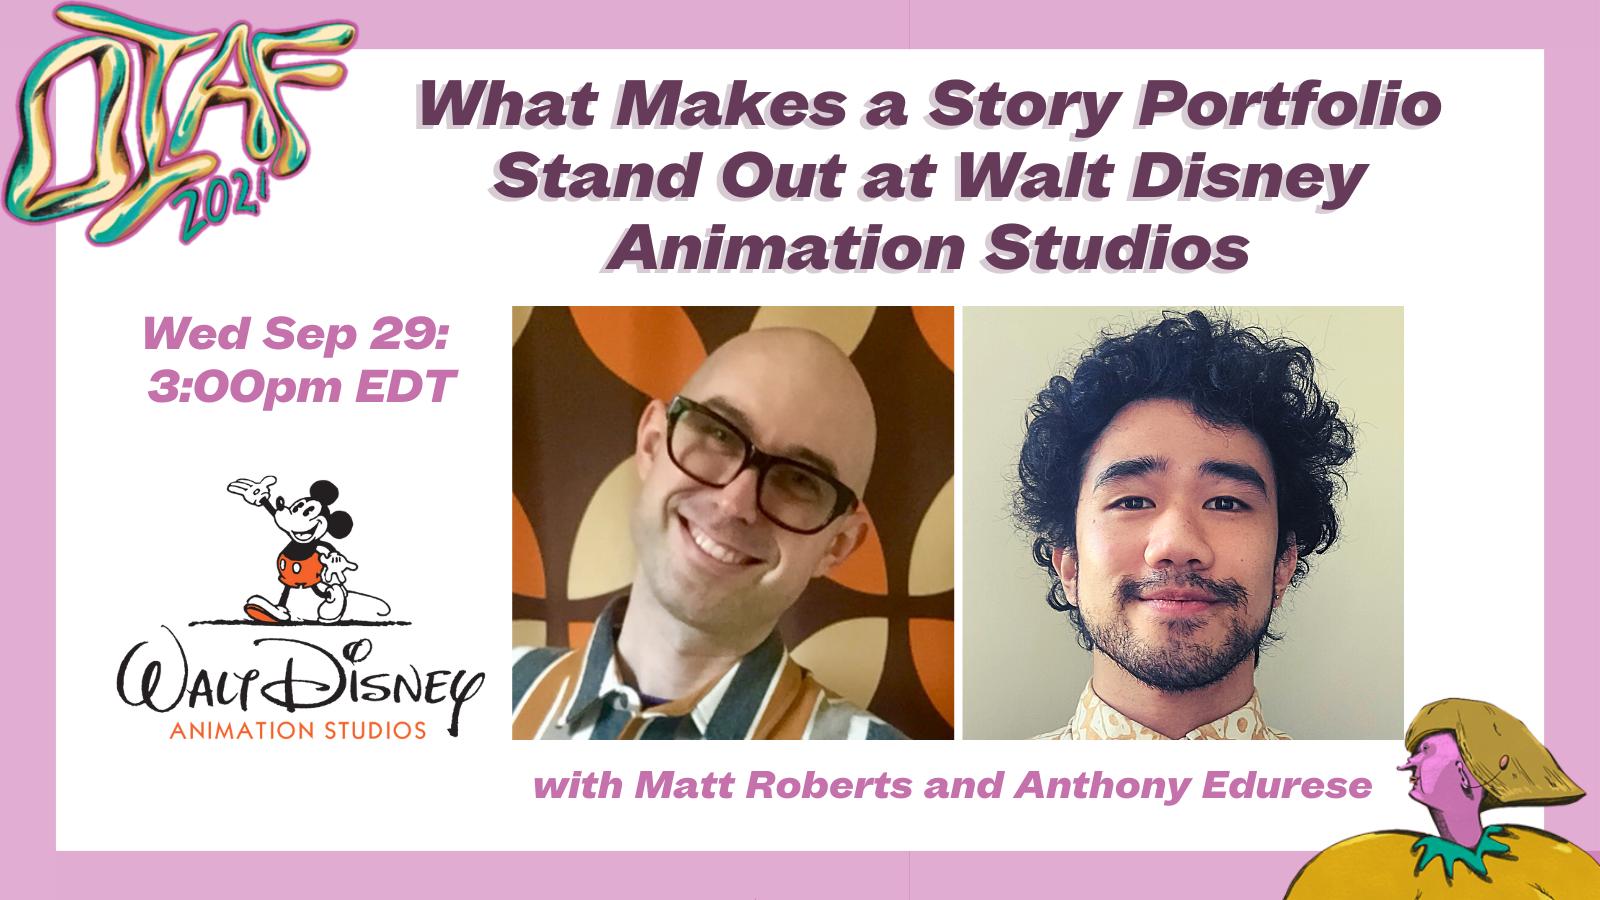 What Makes a Story Portfolio Stand Out at Walt Disney Animation Studios |  OIAF 2021